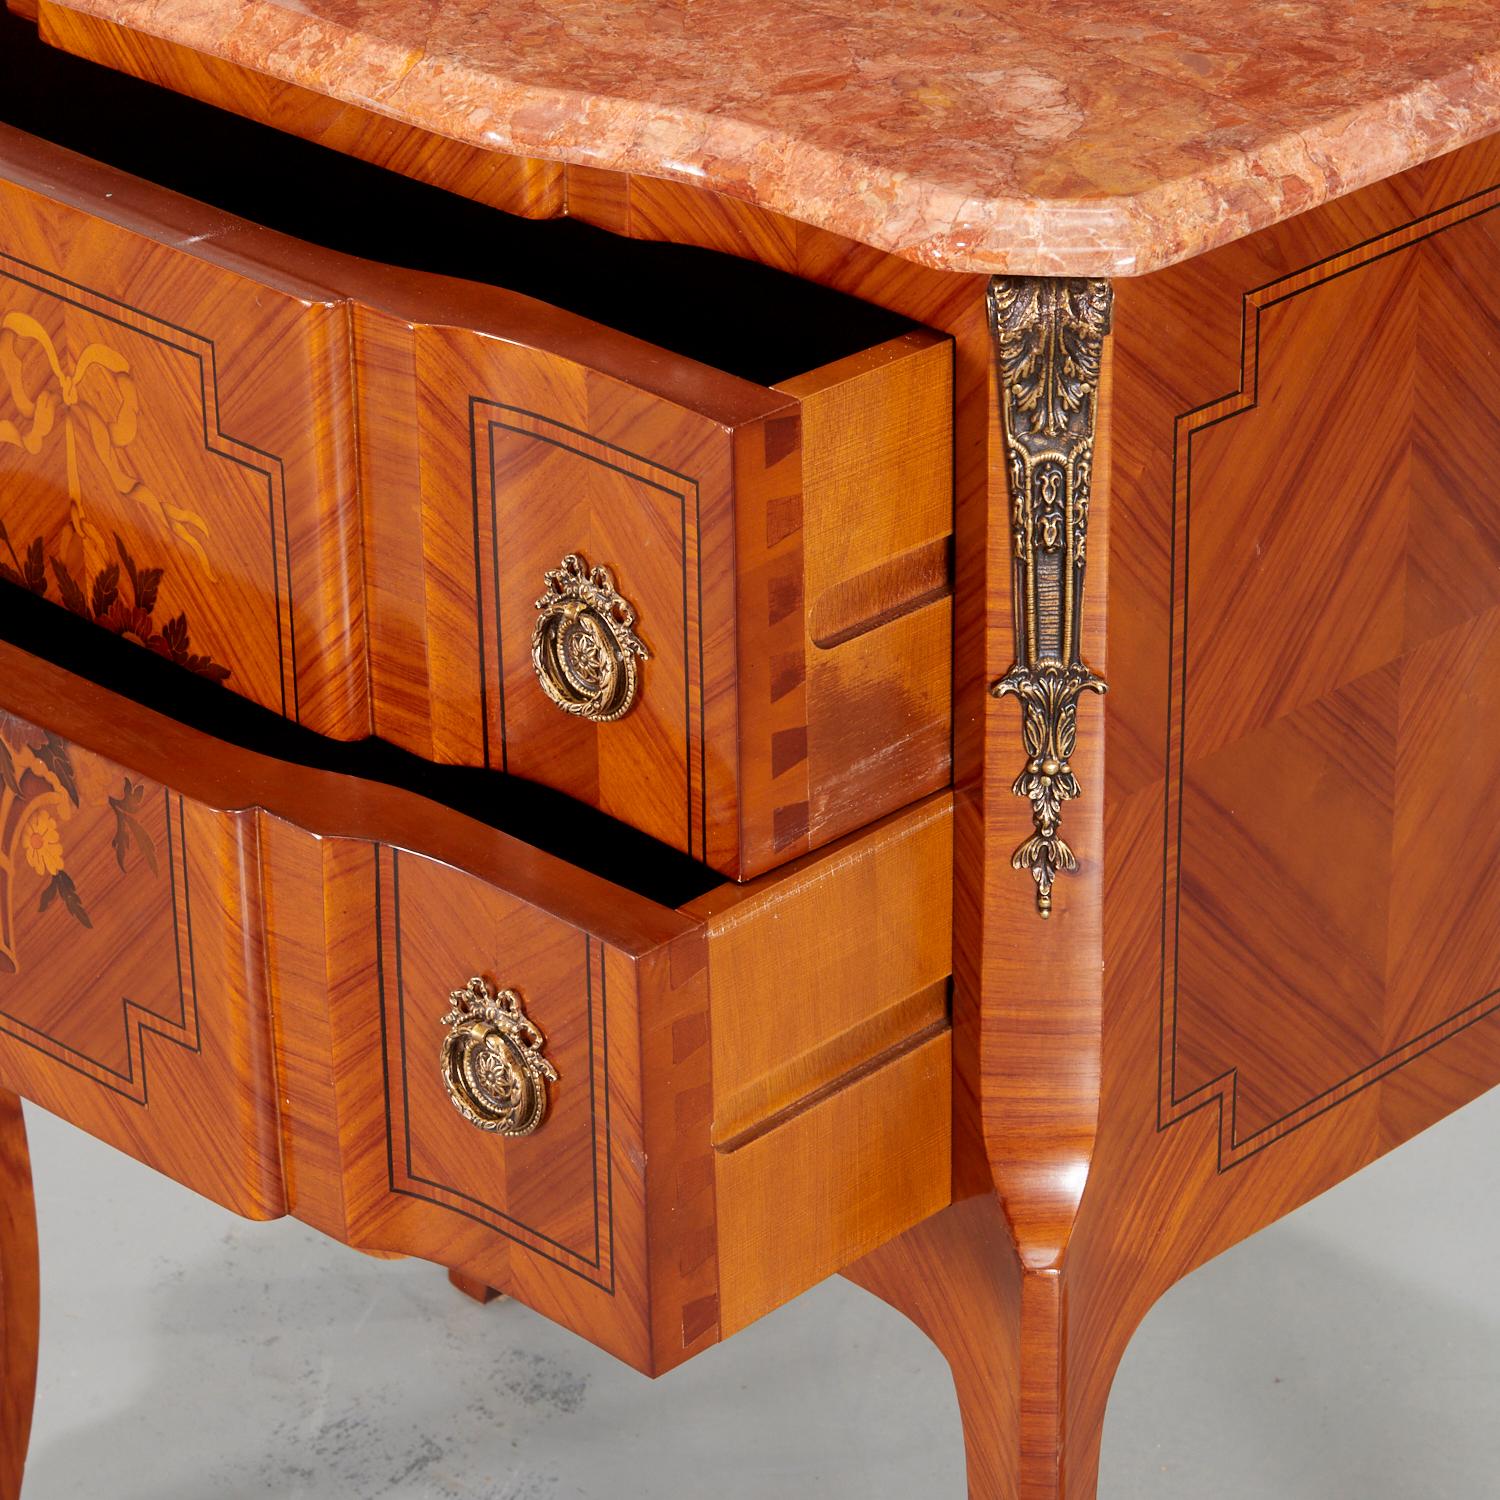 20th c., Louis XV/XVI transitional style inlaid commode with loose shaped rouge marble top, inlaid flower basket design to both drawer fronts on slender cabriole legs with scrolled caps. The sides and front with cross banding and bookmatched veneer.